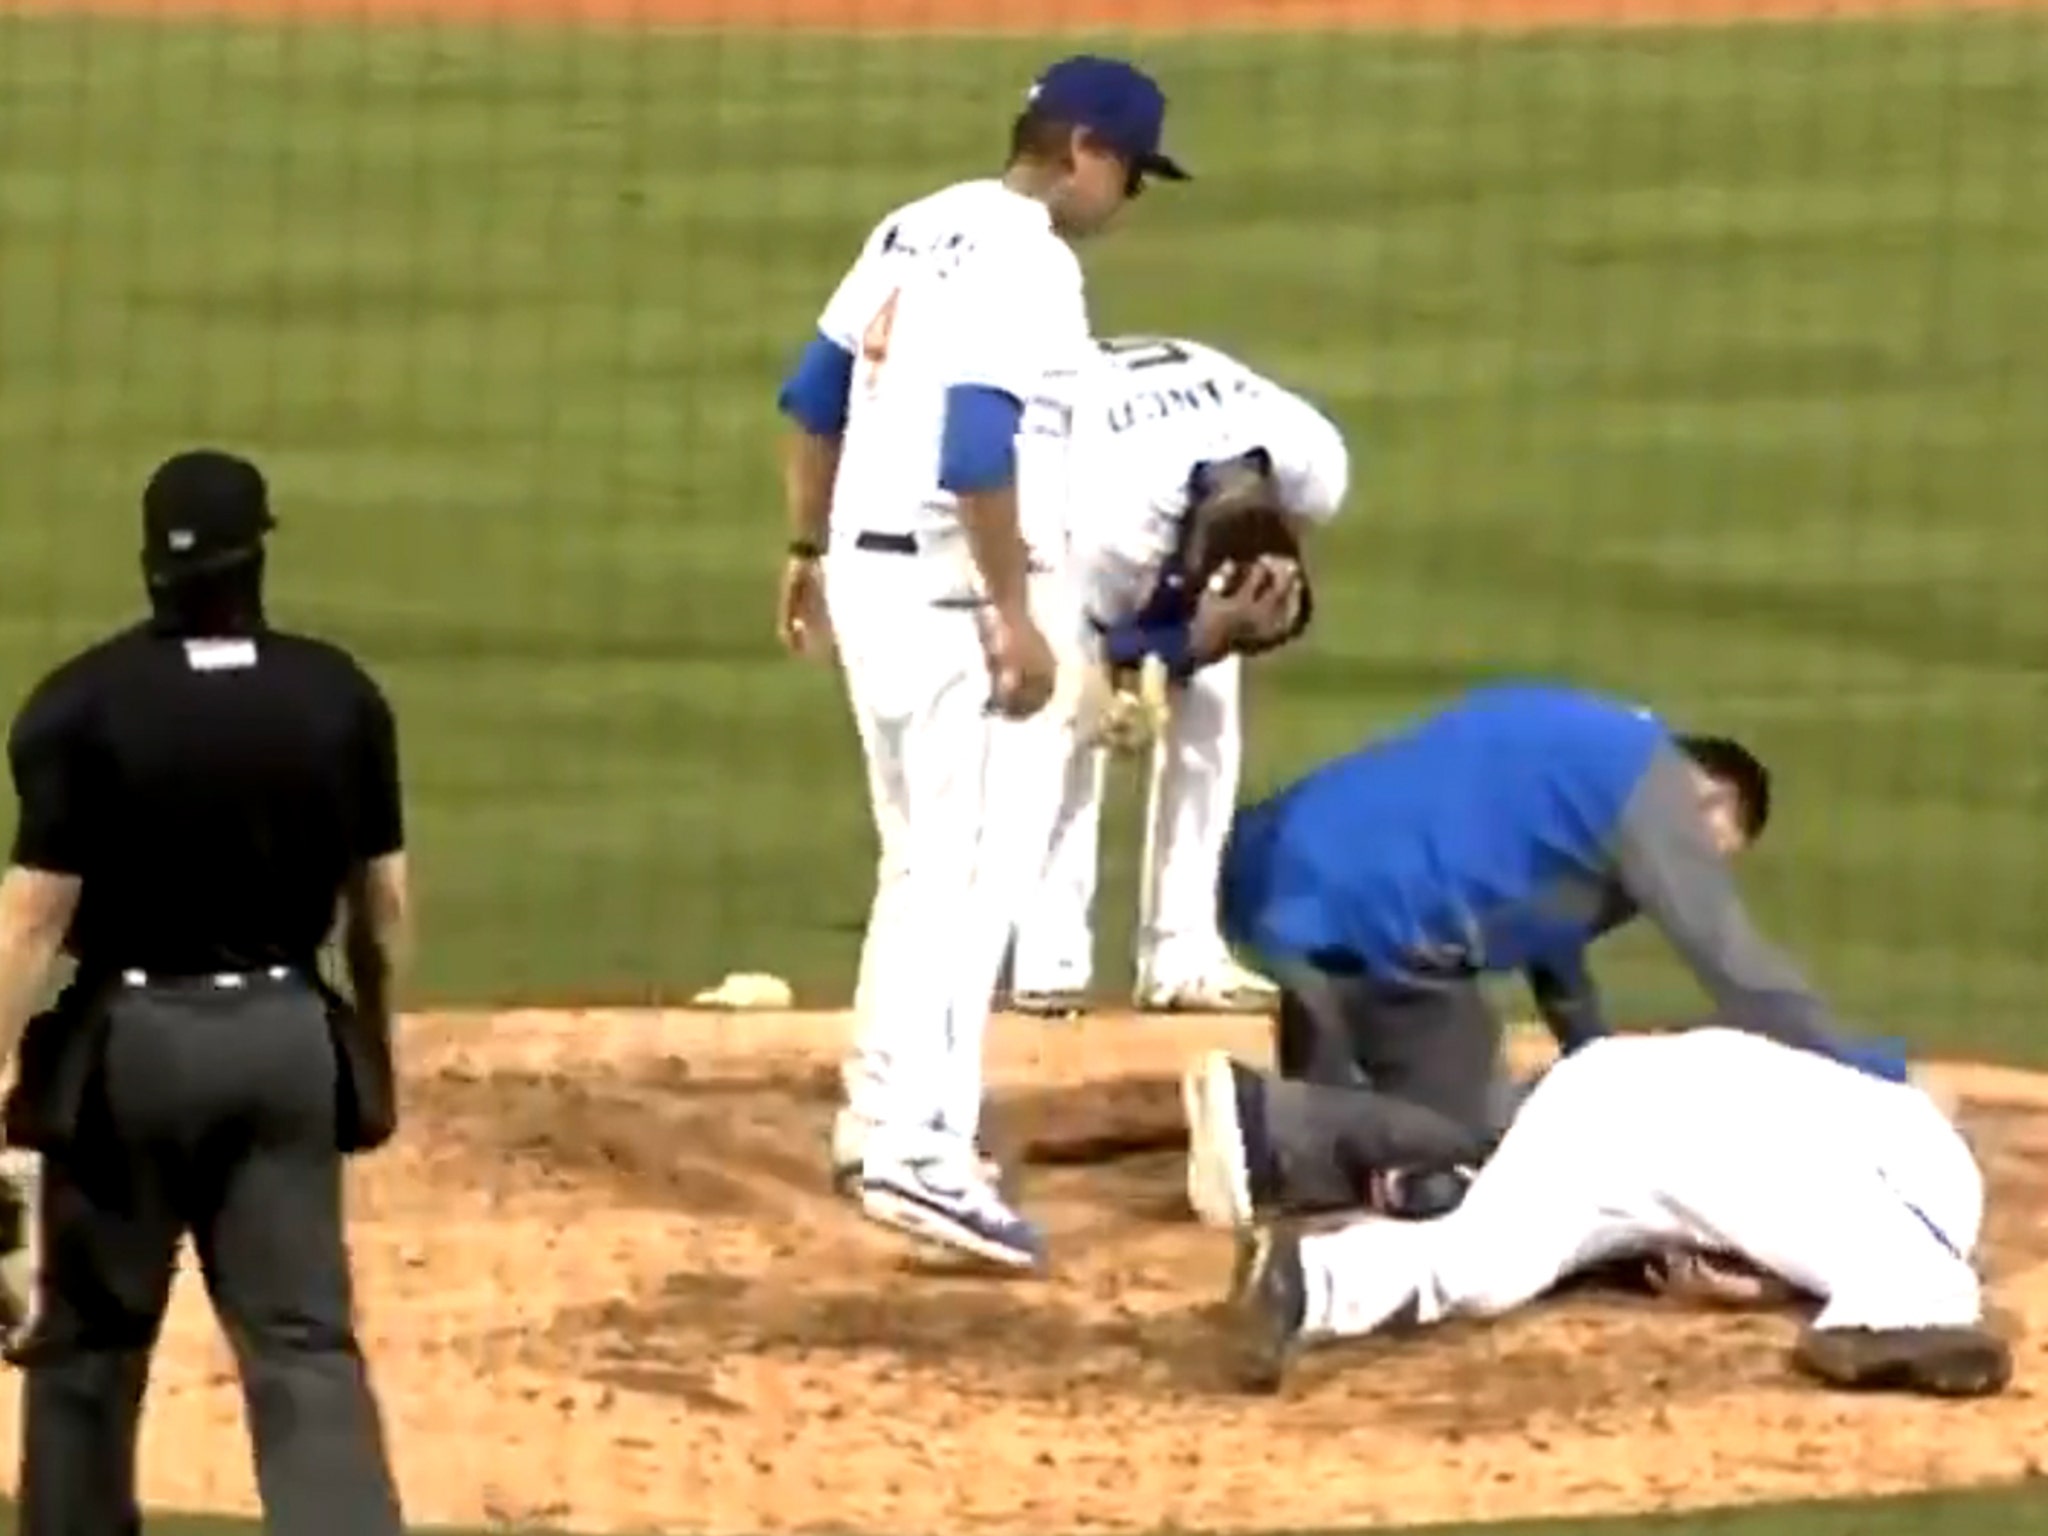 Durham Bulls pitcher hospitalized after mound injury to head